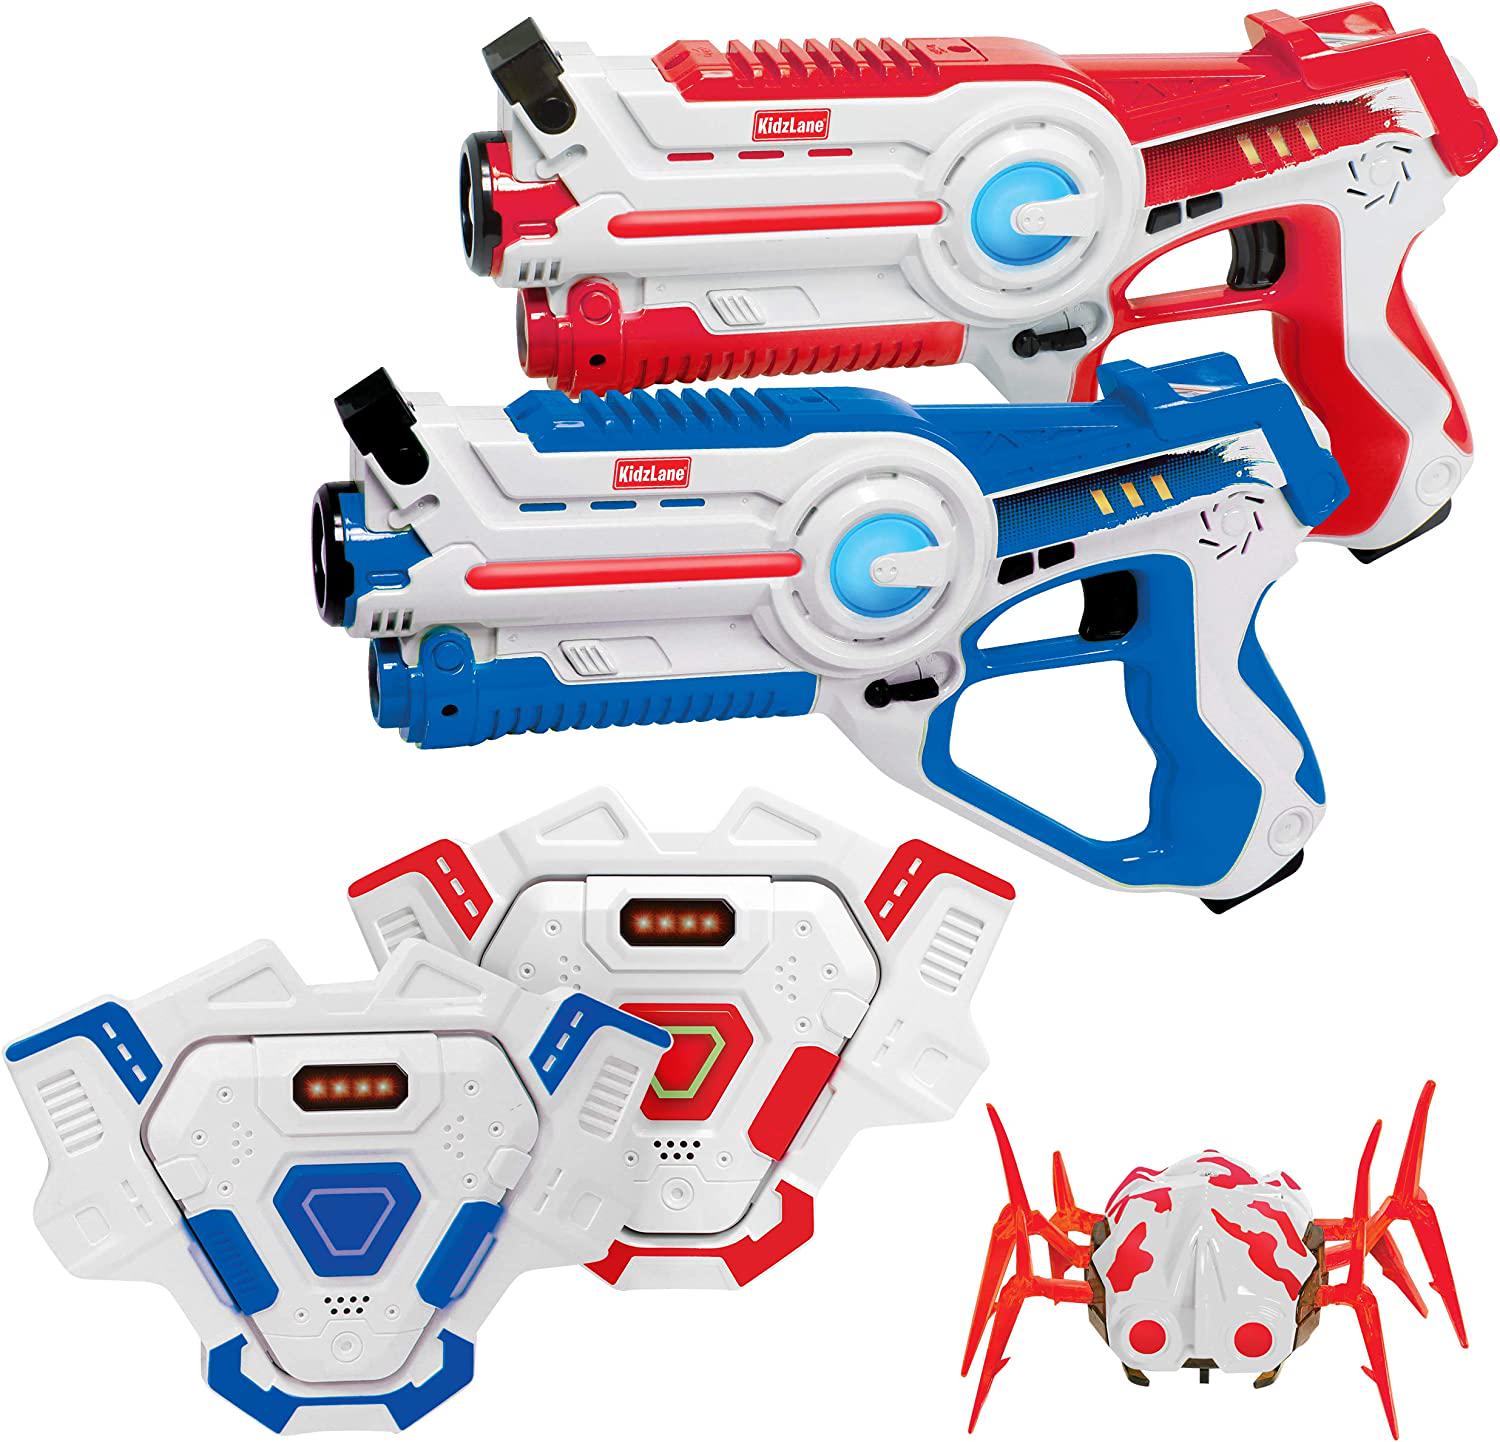 kidzlane, Kidzlane Laser tag Set | Lazer Tag Set of 2 with Vest and Shooting Target Spider | Indoor or Outdoor Laser Tag Shooting Game for Teenage Kids Boys and Girls | Ages 8+